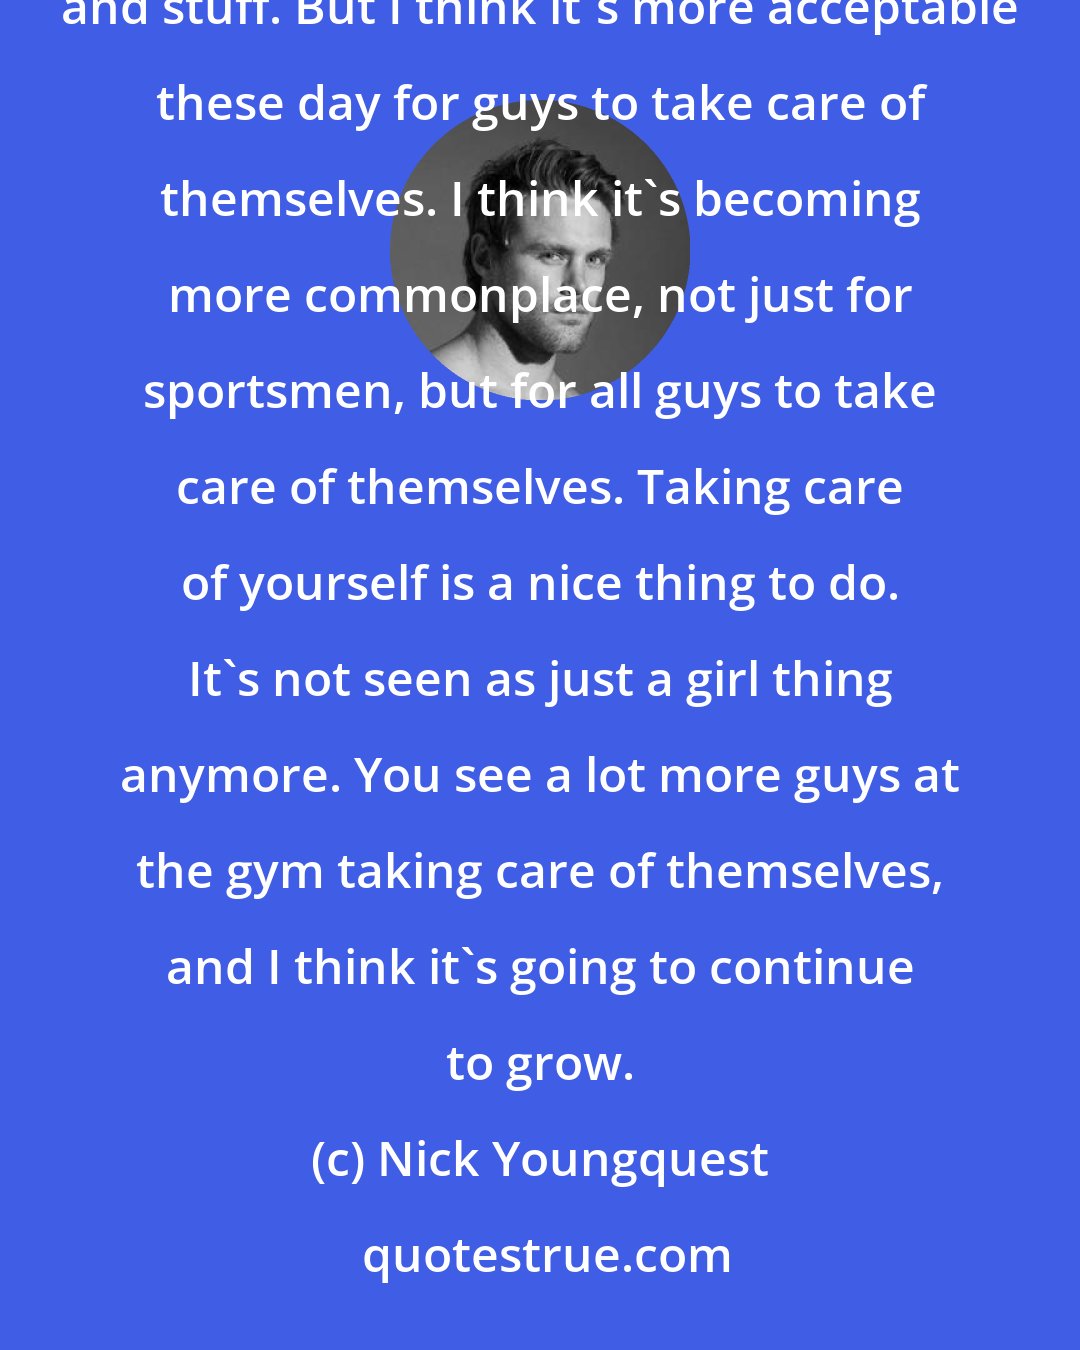 Nick Youngquest: People used to think I was so strange because my toiletry bag used to contain so many grooming items and cosmetics and stuff. But I think it's more acceptable these day for guys to take care of themselves. I think it's becoming more commonplace, not just for sportsmen, but for all guys to take care of themselves. Taking care of yourself is a nice thing to do. It's not seen as just a girl thing anymore. You see a lot more guys at the gym taking care of themselves, and I think it's going to continue to grow.